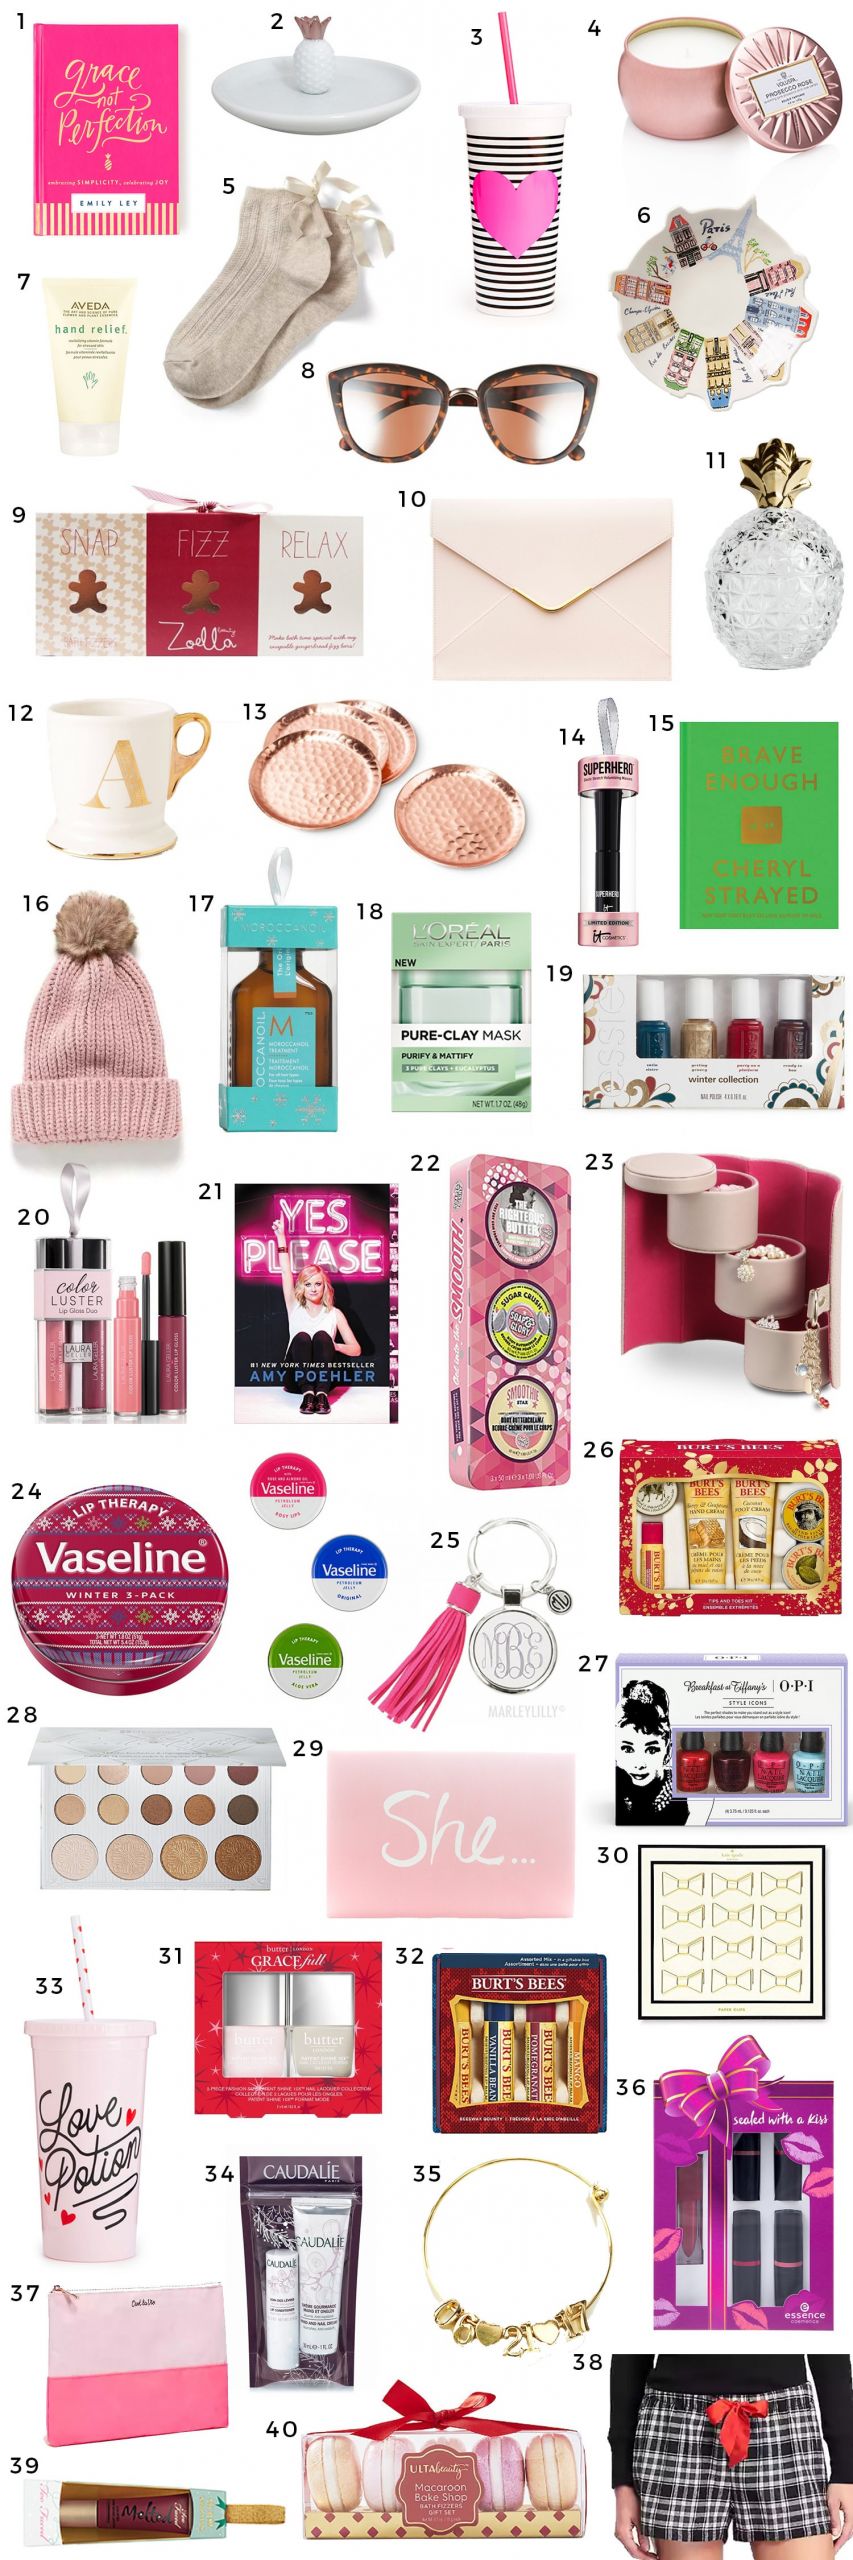 Holiday Gift Ideas For Woman
 The Best Christmas Gift Ideas for Women Under $15